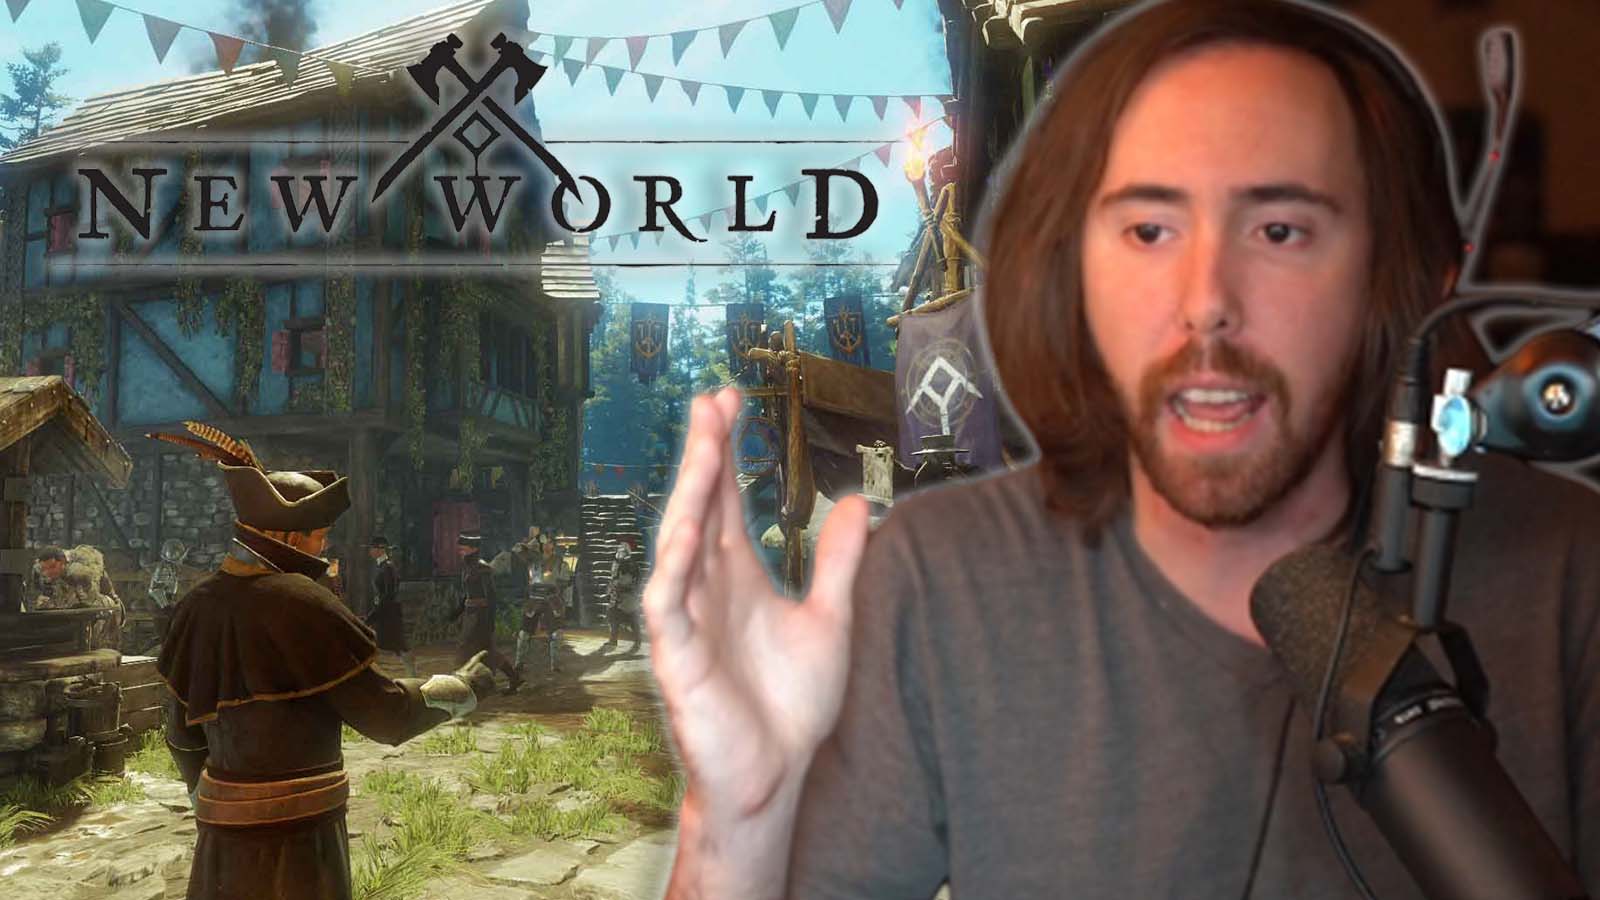 Asmongold's New World scalp sparks debate on Twitch streamer name debacle